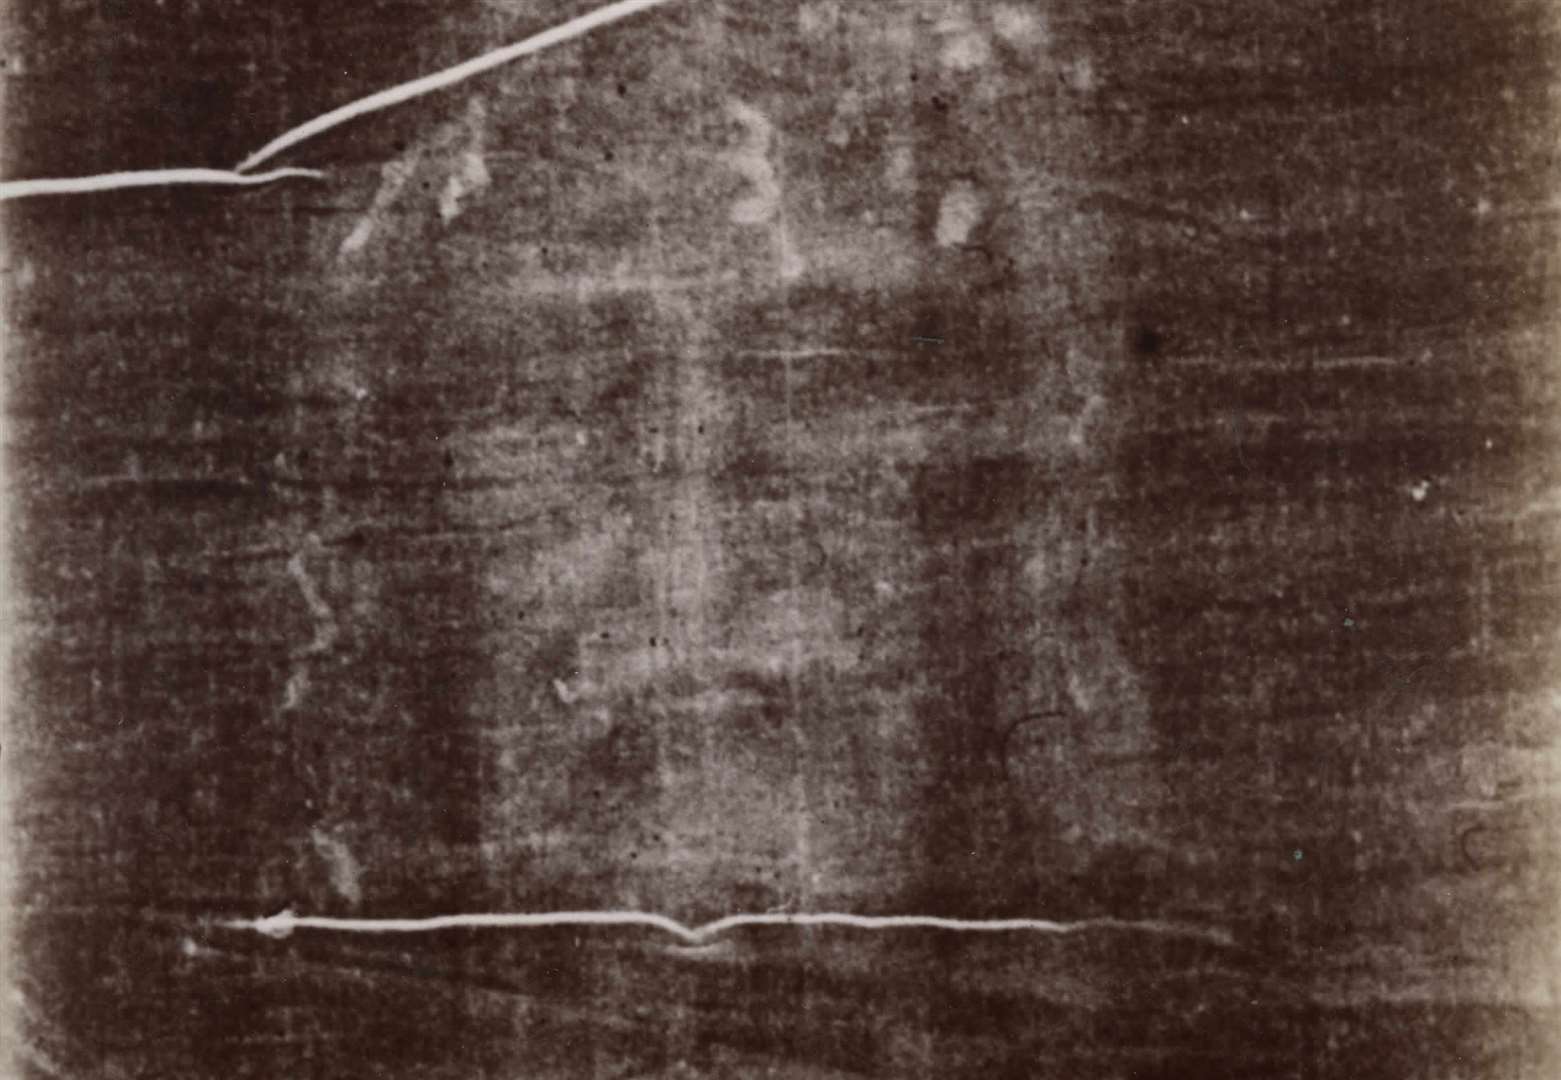 The Turin Shroud - perhaps the most famous of all relics from the Middles Ages...or, at least, so it seems